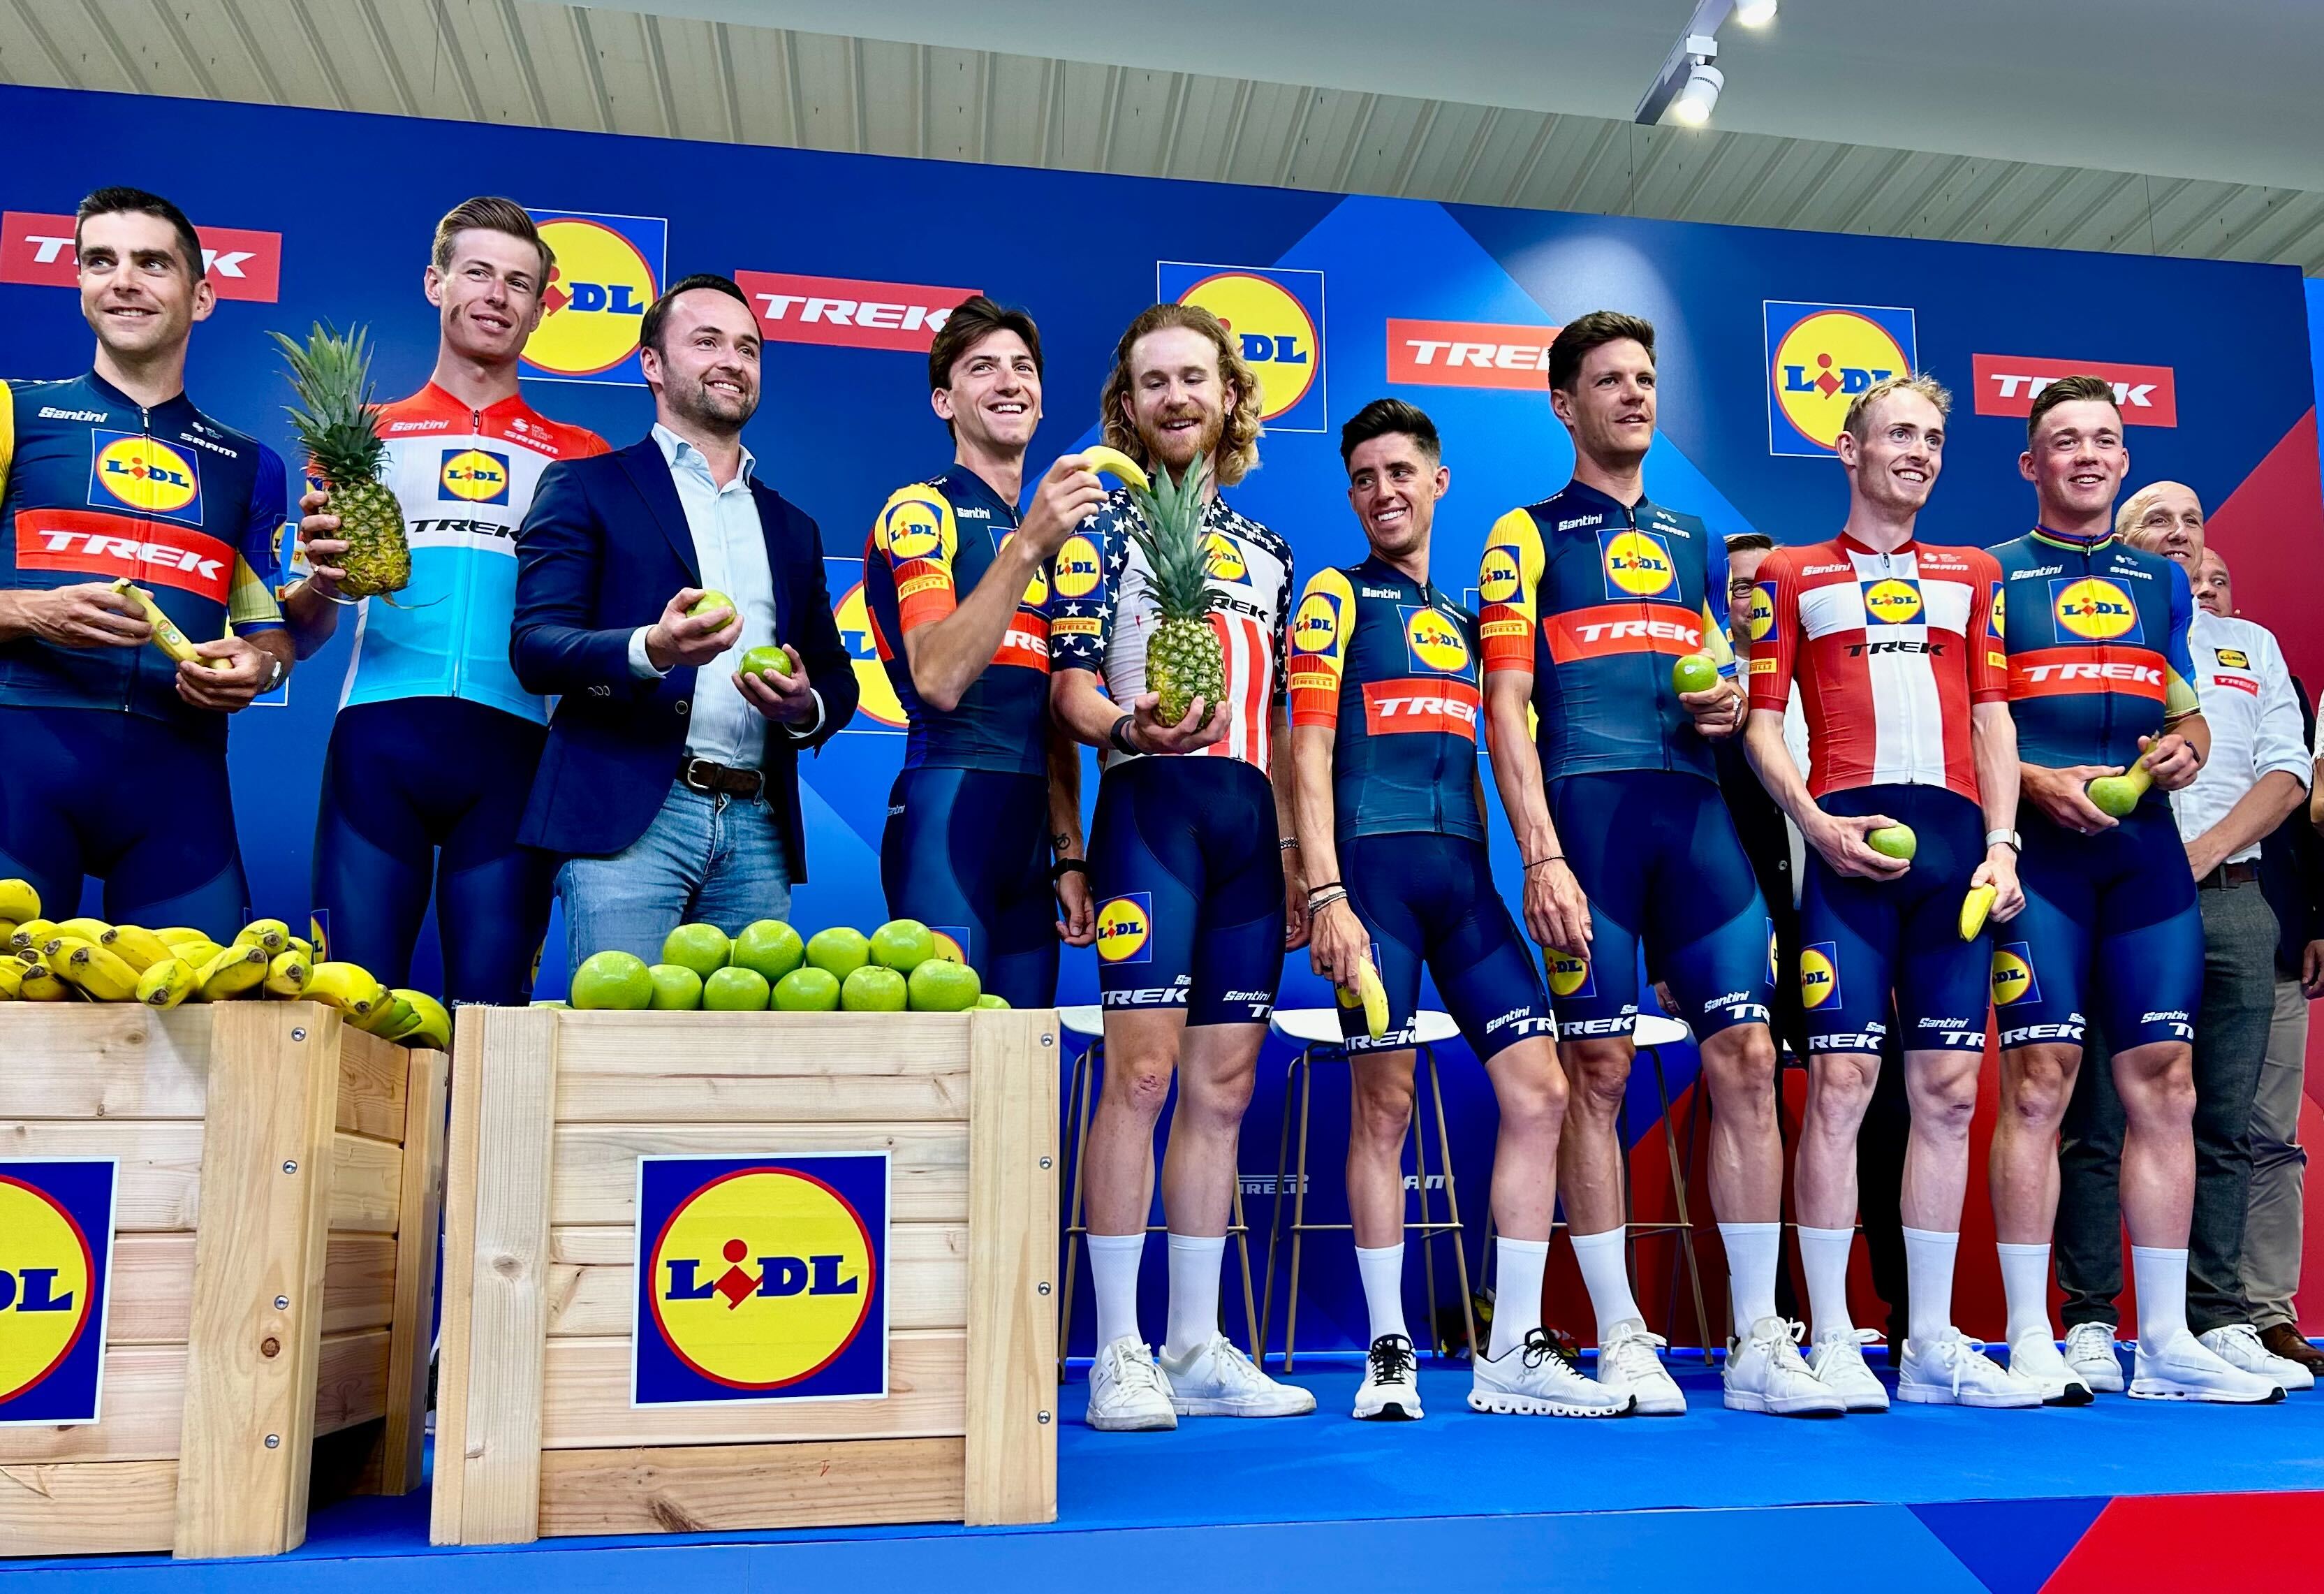 LidlTrek present new sponsorship and fresh red, yellow and blue kit